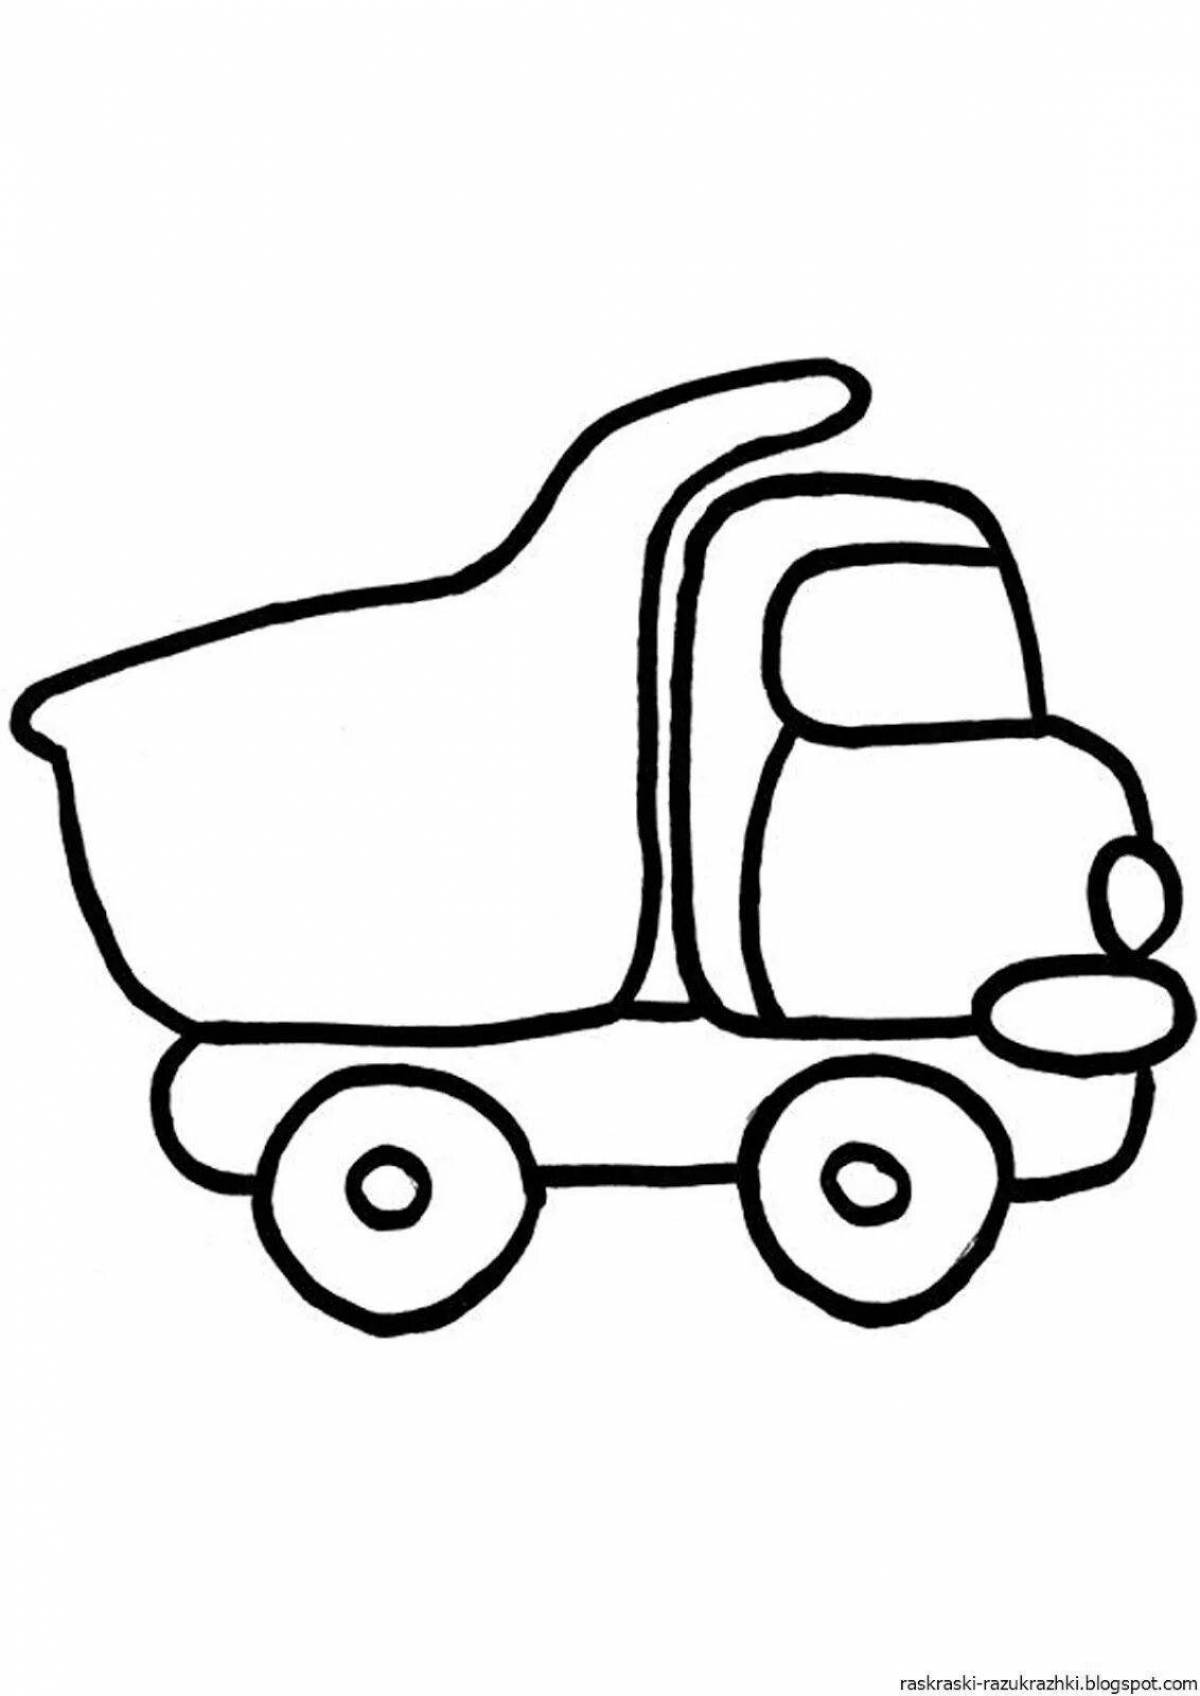 Humorous car coloring book for 3 year olds